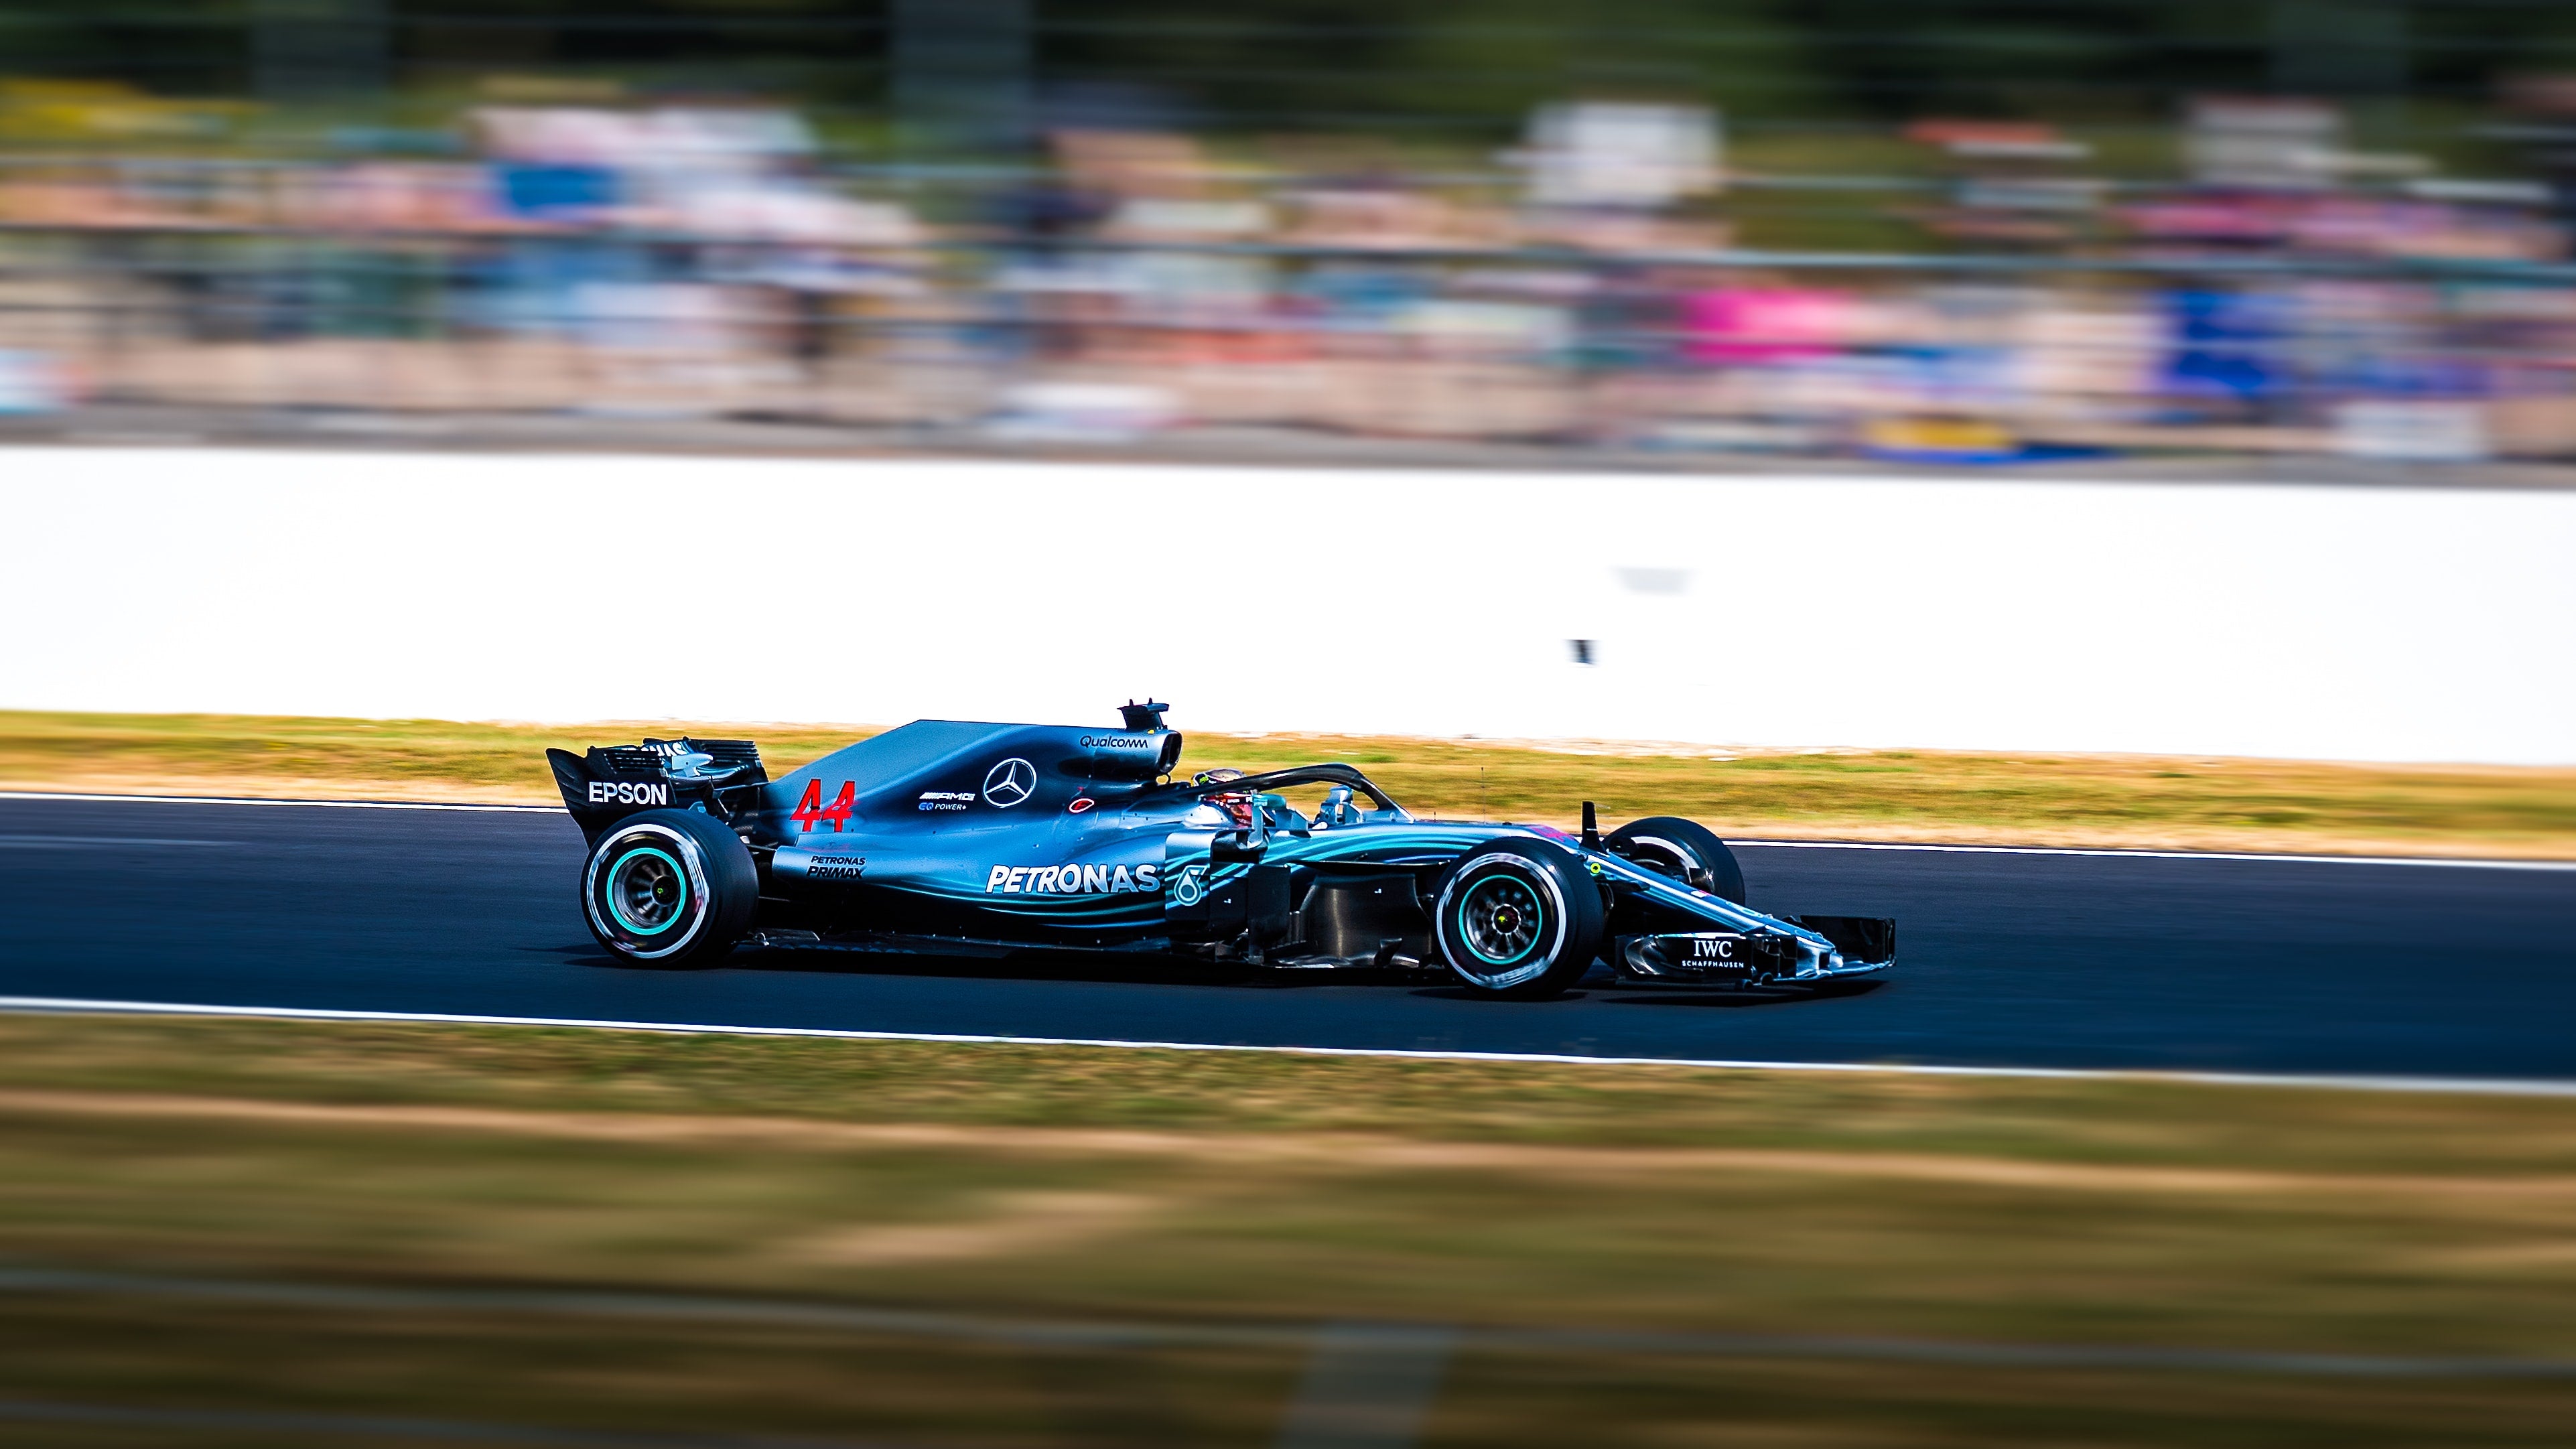 Get up to speed for the F1 British Grand Prix